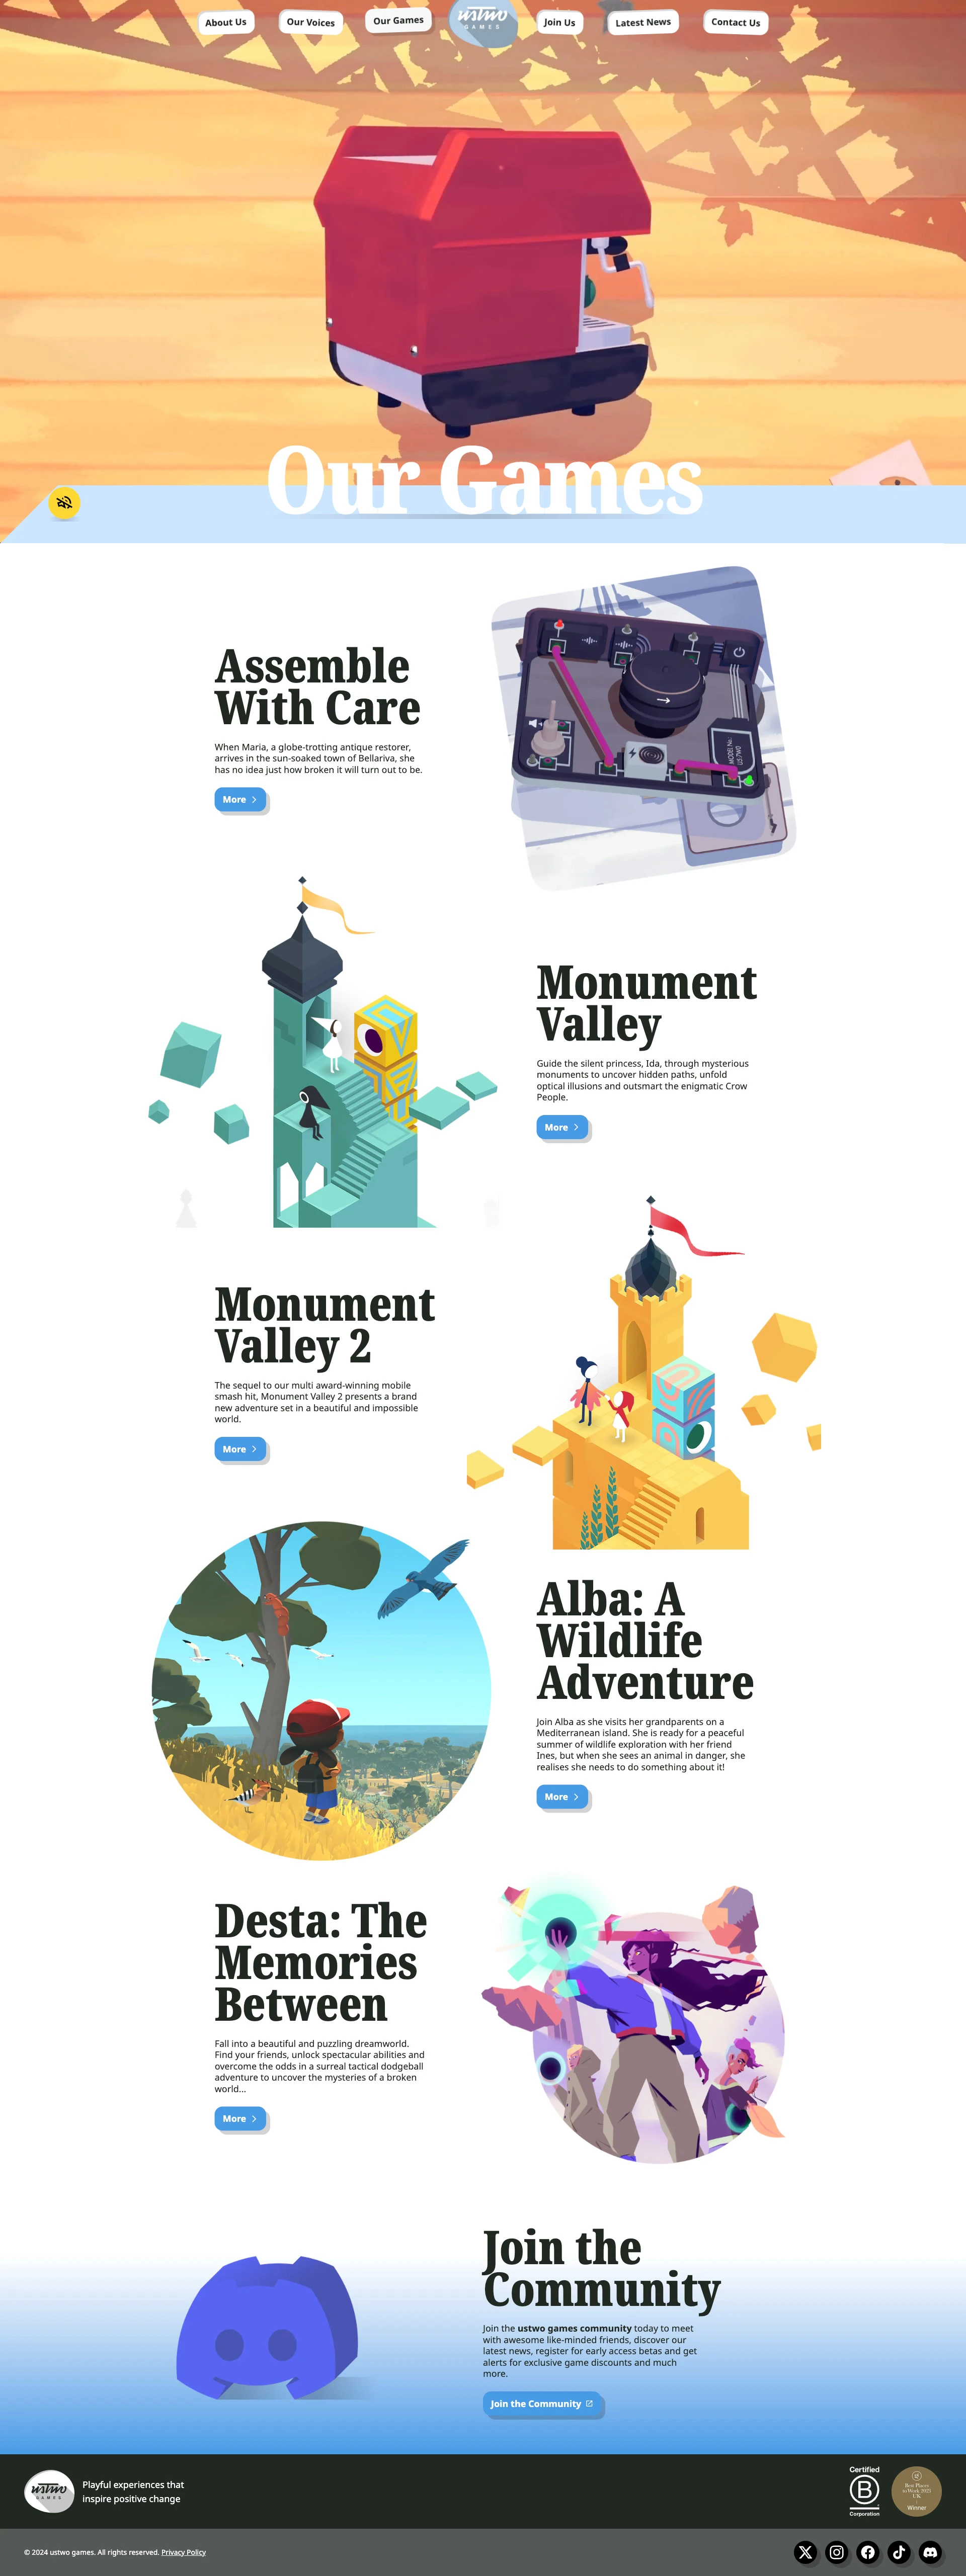 ustwo games Landing Page Example: We are a small (and creative, cool, passionate and great!) game studio, found in South London. We are best known for our award-winning Monument Valley series and the inspiring eco-adventure Alba: A Wildlife Adventure.